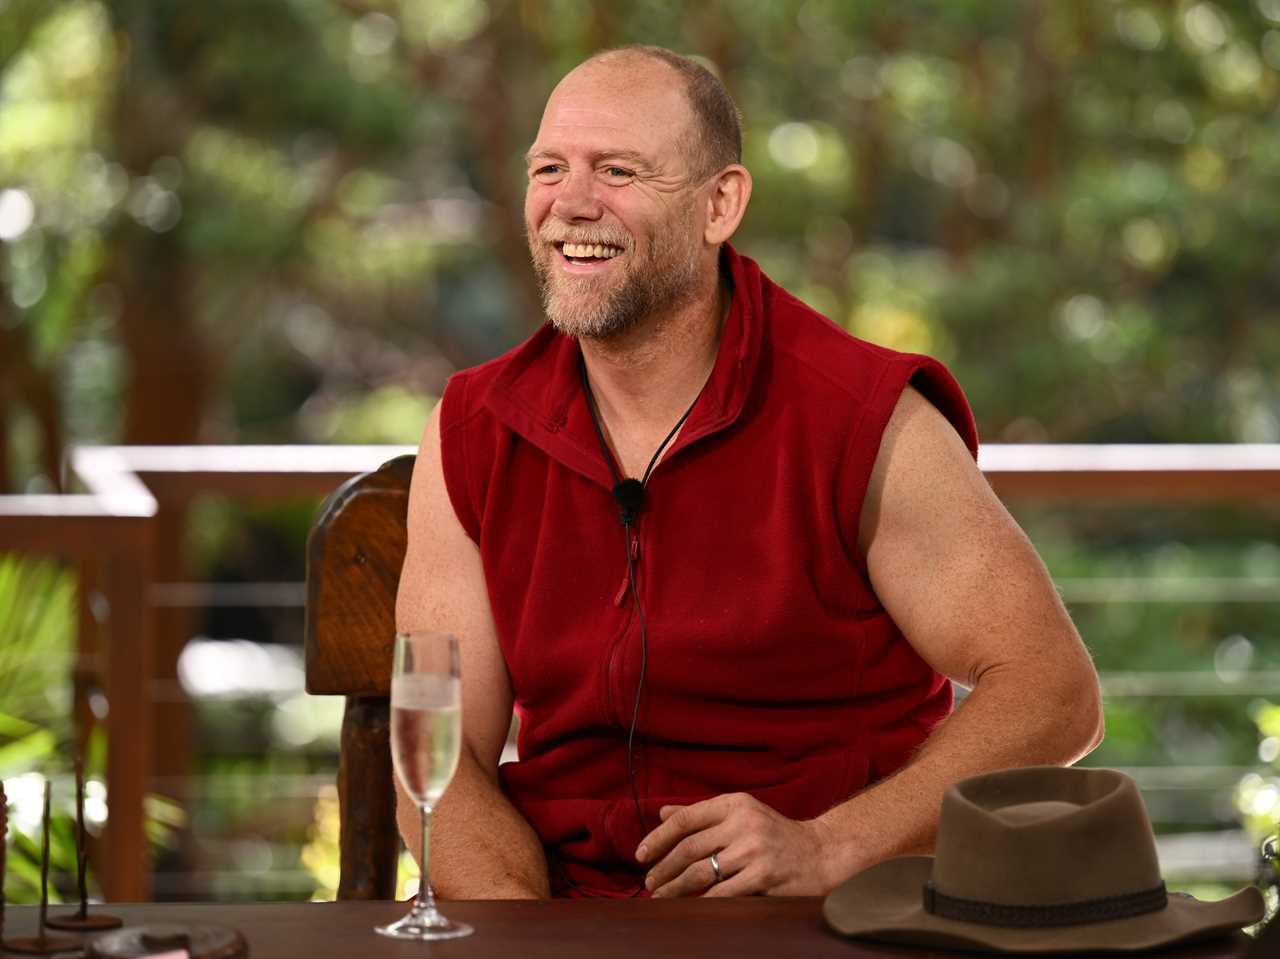 I’m A Celeb’s Mike Tindall gushes over his wife Zara in sweet post